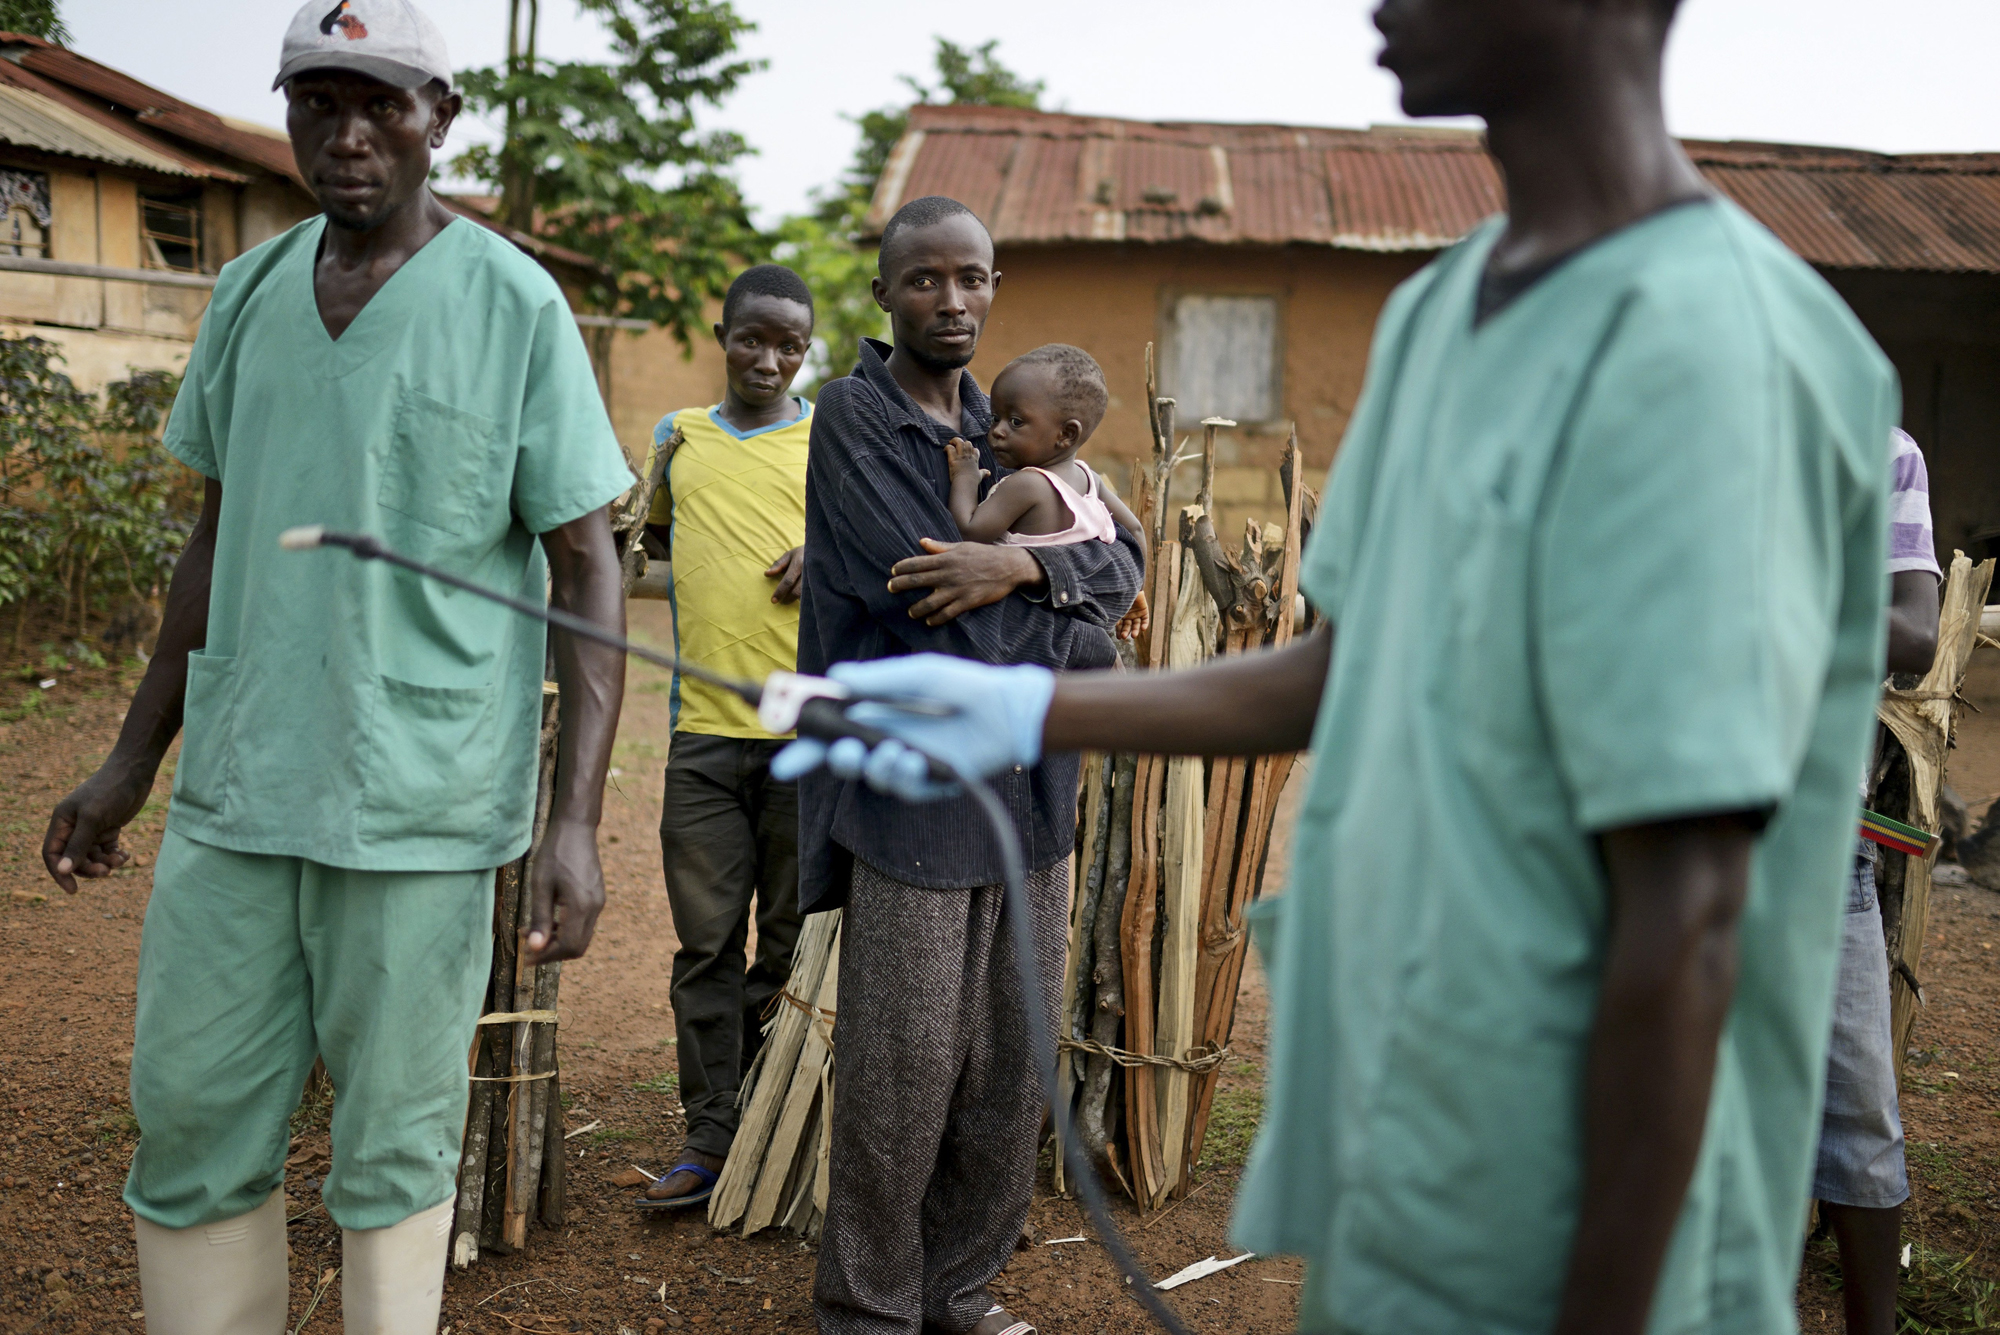 Locals watch workers with Doctors Without Borders as they disinfect after leaving a private clinic, where they've been working to combat the spread of the Ebola virus, Teldou, Guinea, July 10, 2014.